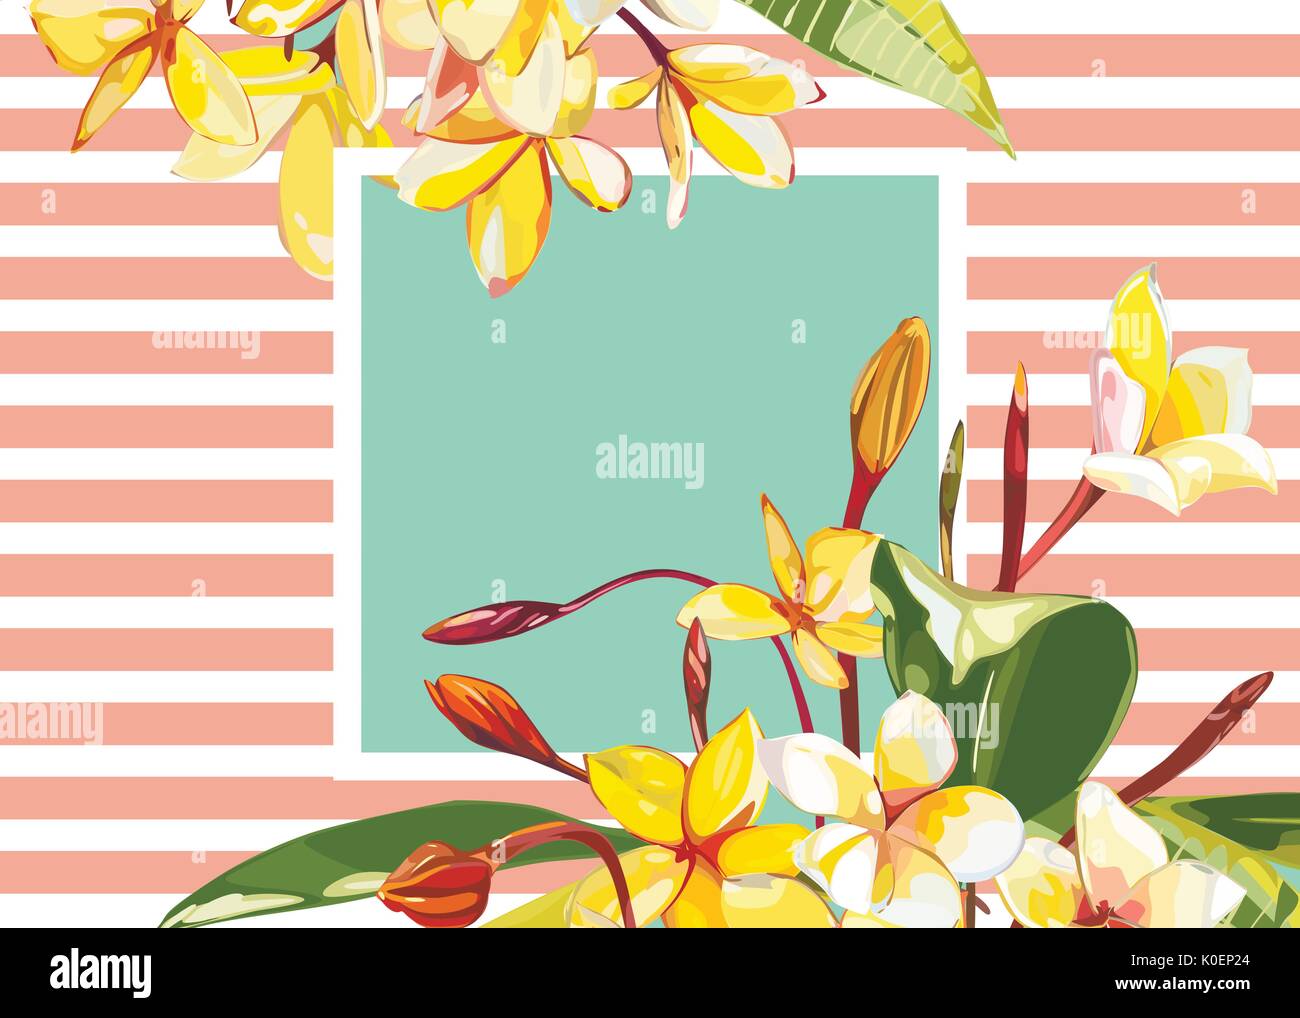 Floral frame with Plumeria flowers on light background. Greeting card or template for wedding's Day design. EPS 10 Stock Vector